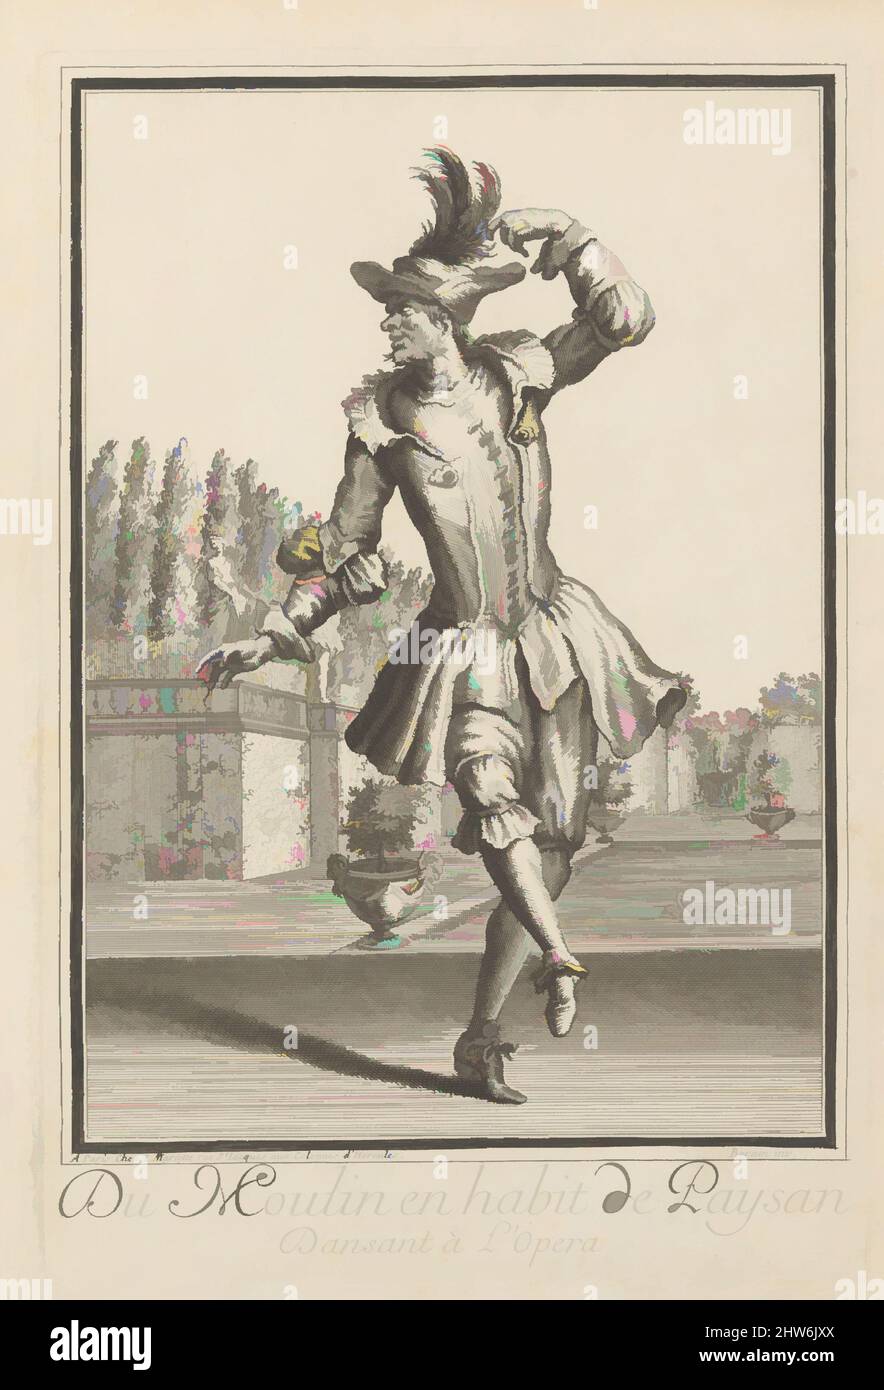 Art inspired by Du Moulin in Peasant Garb Dancing at the Opera, n.d., Etching and engraving, Plate: 11 15/16 × 7 15/16 in. (30.3 × 20.2 cm), Jean Berain (French, Saint-Mihiel 1640–1711 Paris), Etching and engraving with a design for a costume for Henri Du Moulin, one of four brothers, Classic works modernized by Artotop with a splash of modernity. Shapes, color and value, eye-catching visual impact on art. Emotions through freedom of artworks in a contemporary way. A timeless message pursuing a wildly creative new direction. Artists turning to the digital medium and creating the Artotop NFT Stock Photo